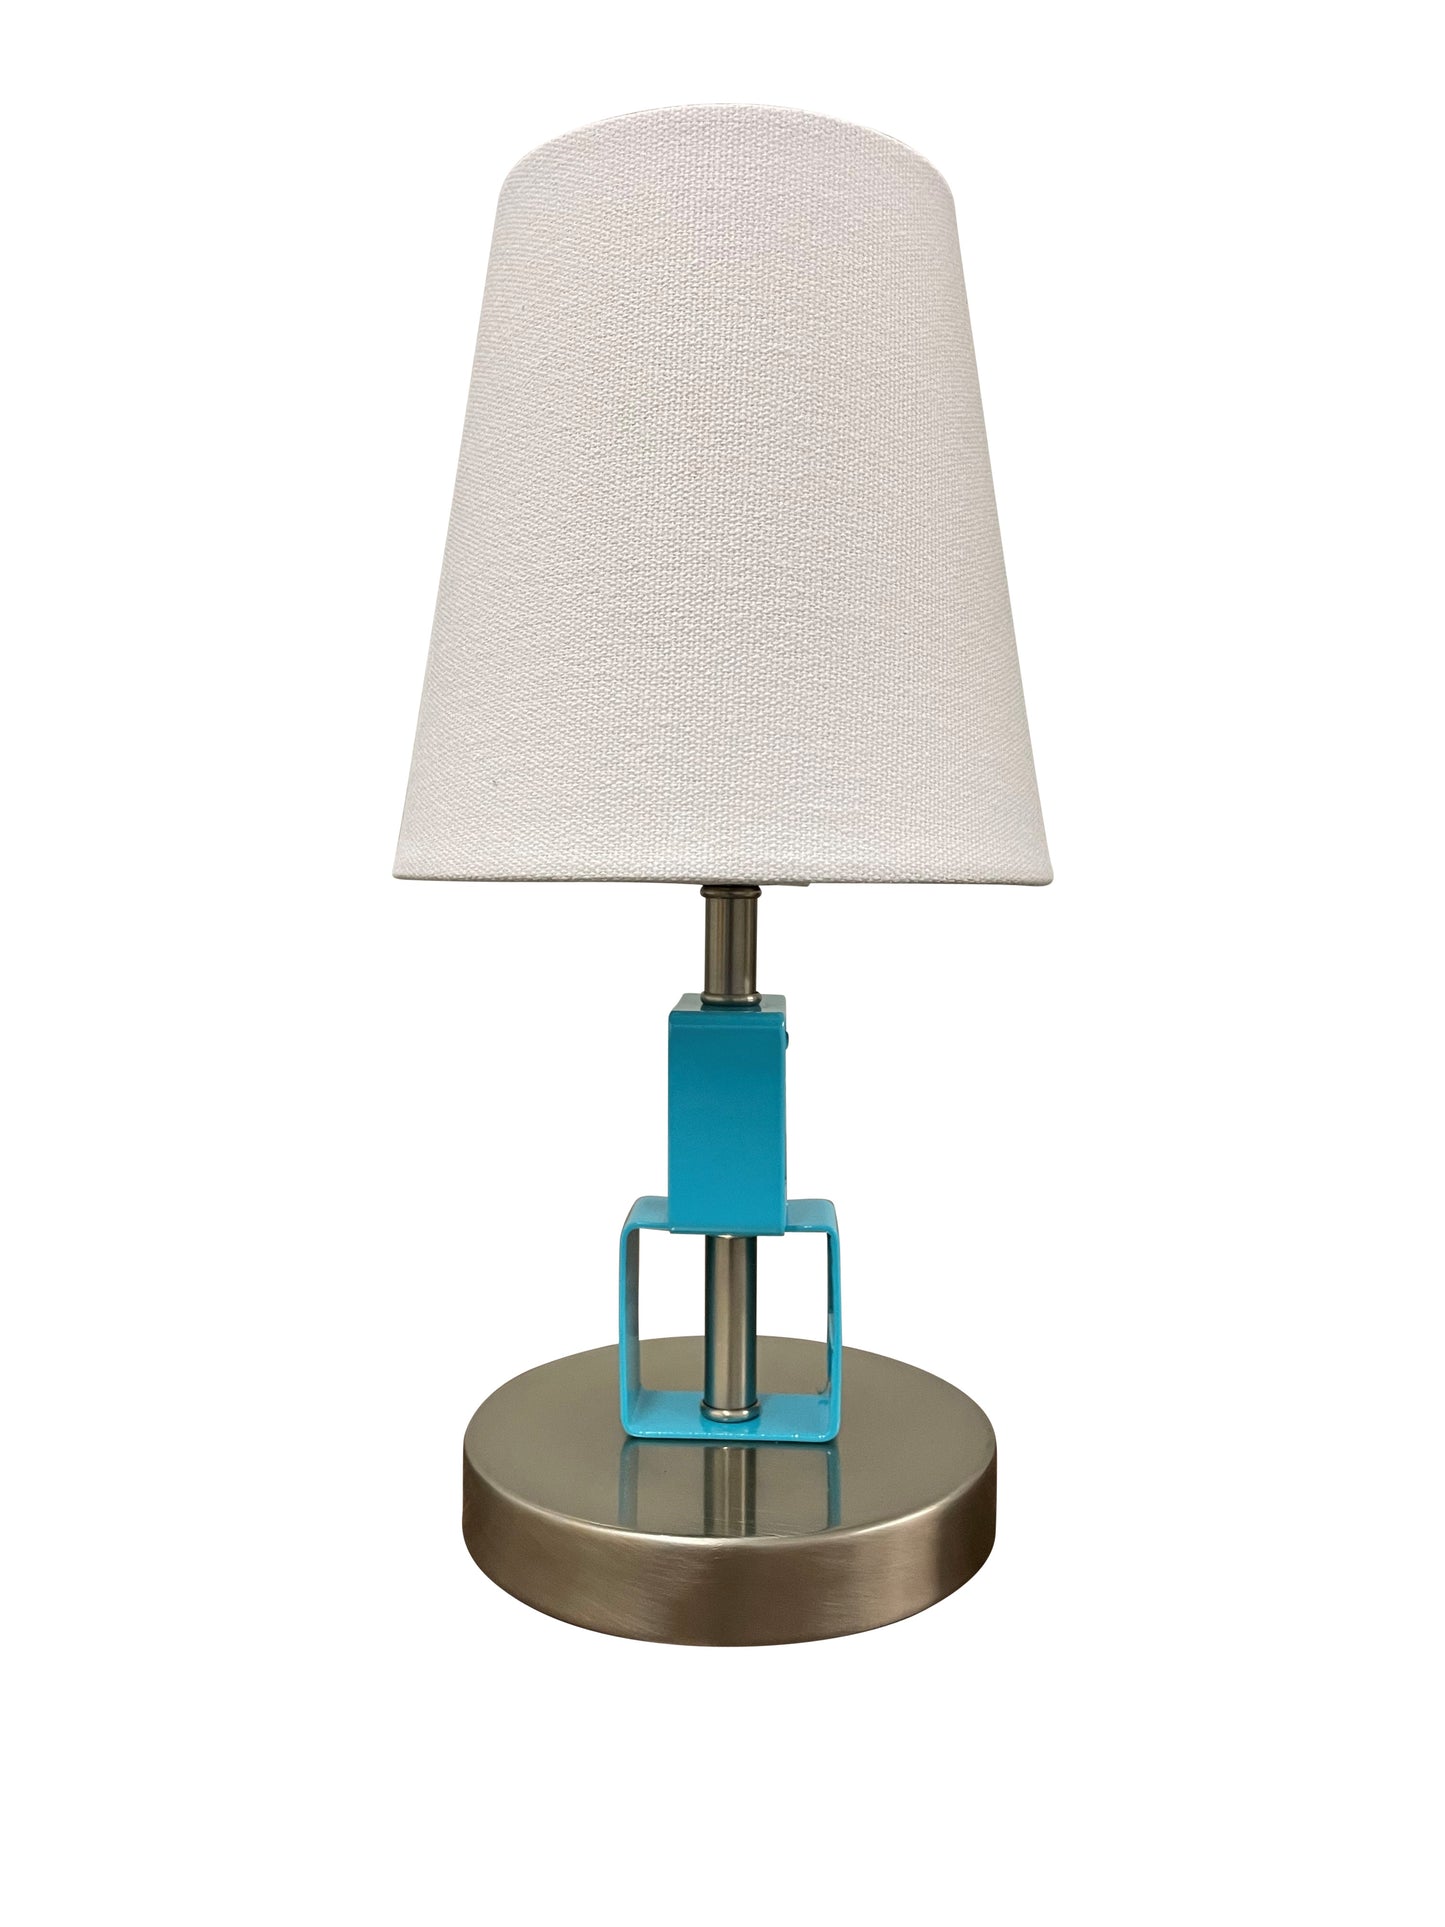 House of Troy Bryson Mini satin nickel and azure accent lamp B208-SN/AZ